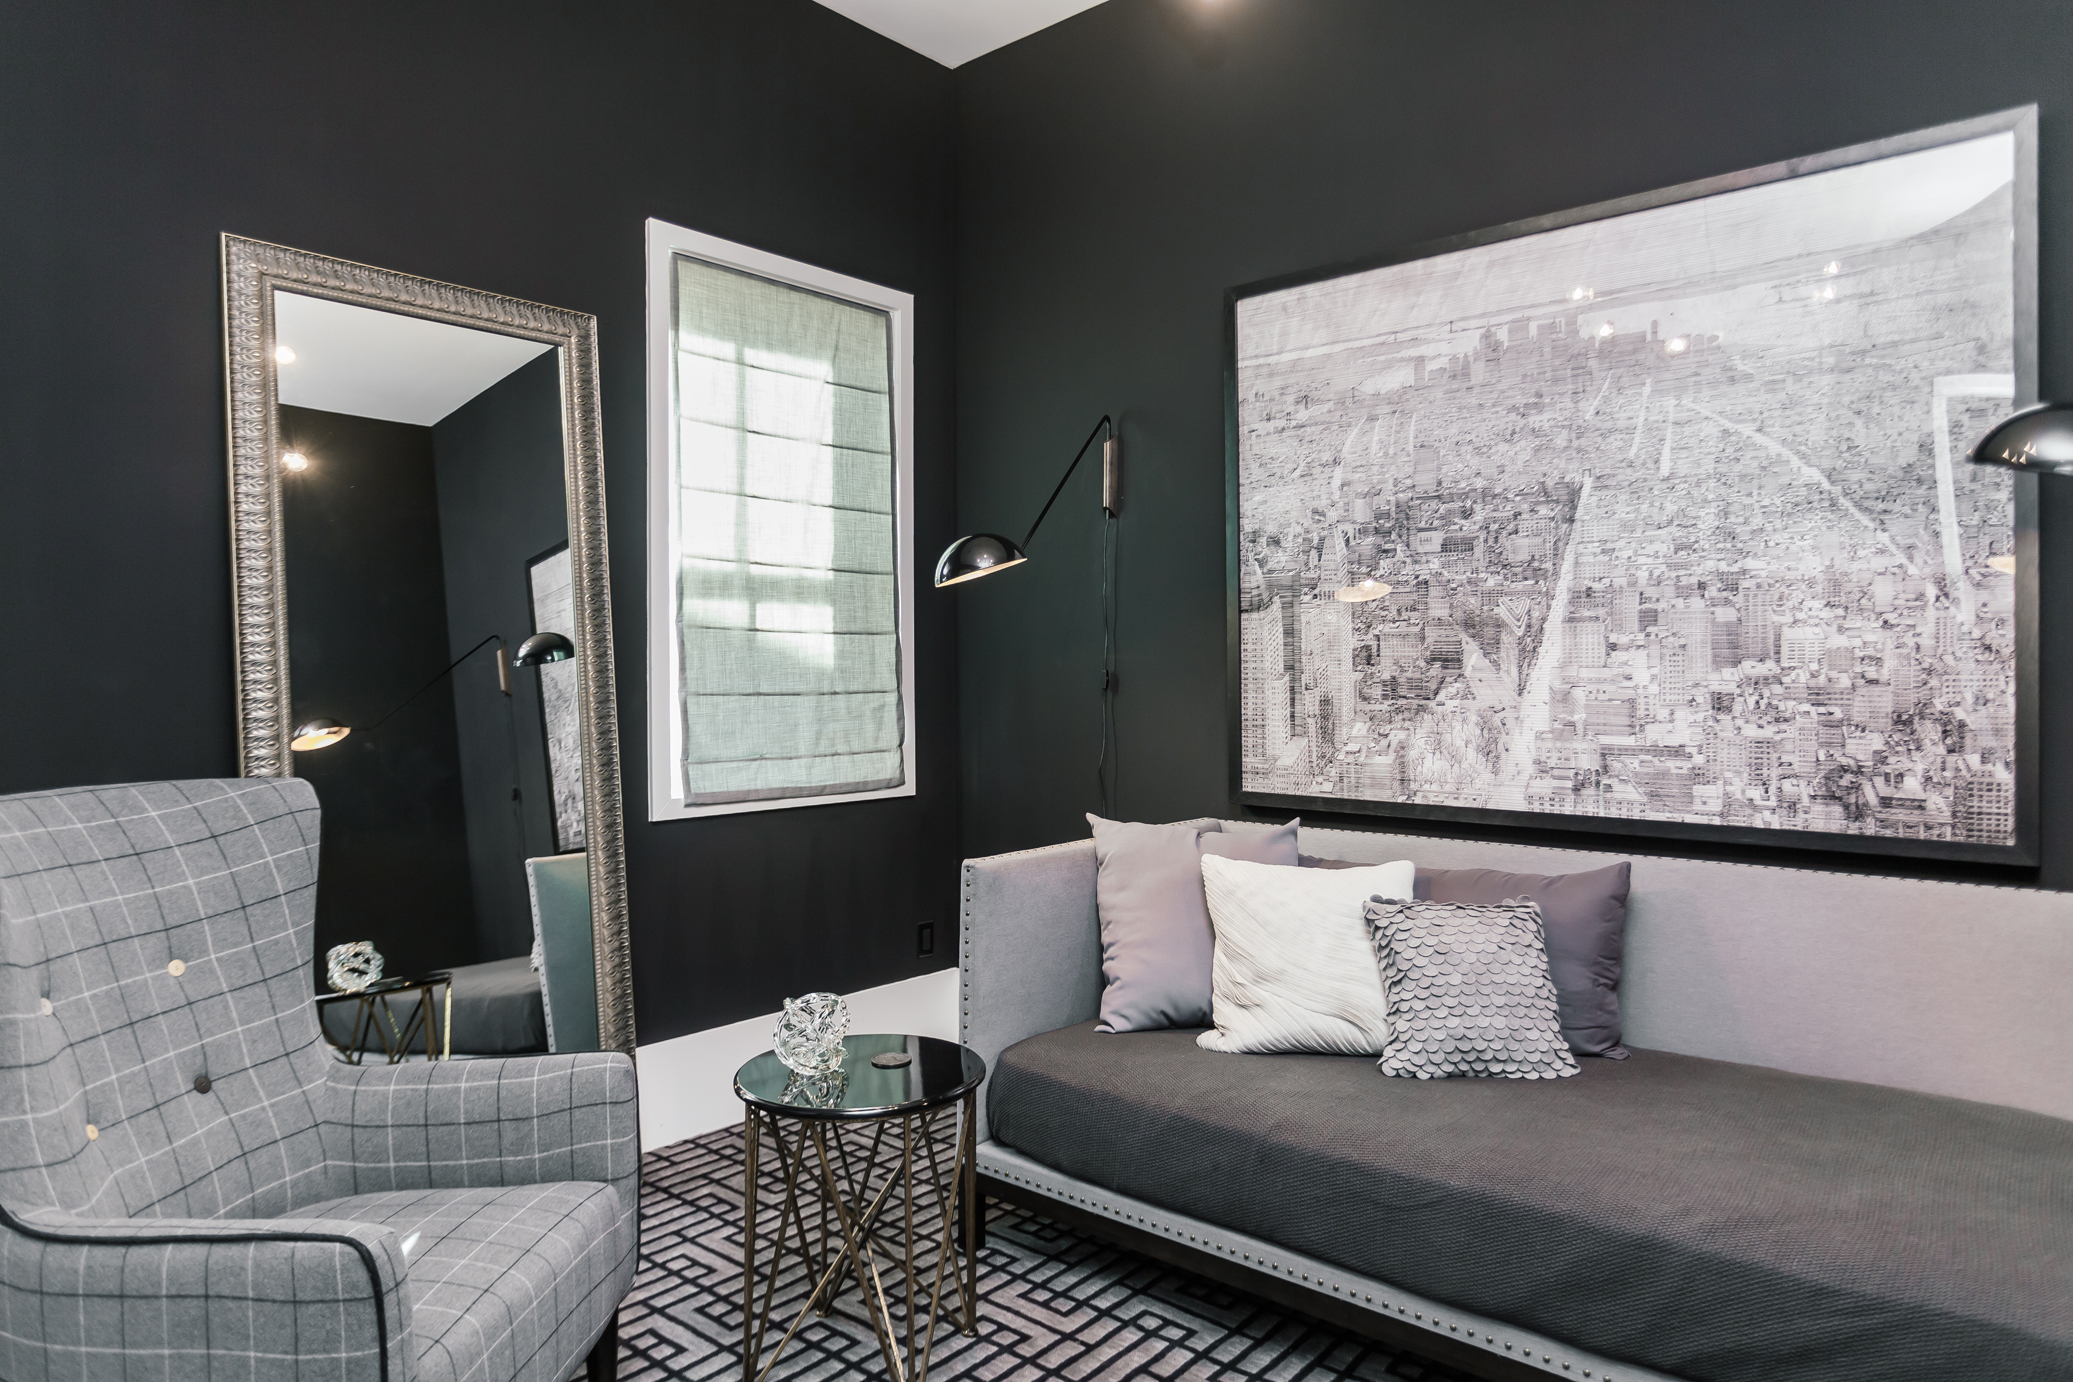 The dark walls of the study are painted in Sherwin Williams’ “Tricorn Black.” A flannel-covered daybed, a patterned carpet and even an ink drawing of one of Jason’s favorite destinations—New York City—are in keeping with the monochromatic palette.